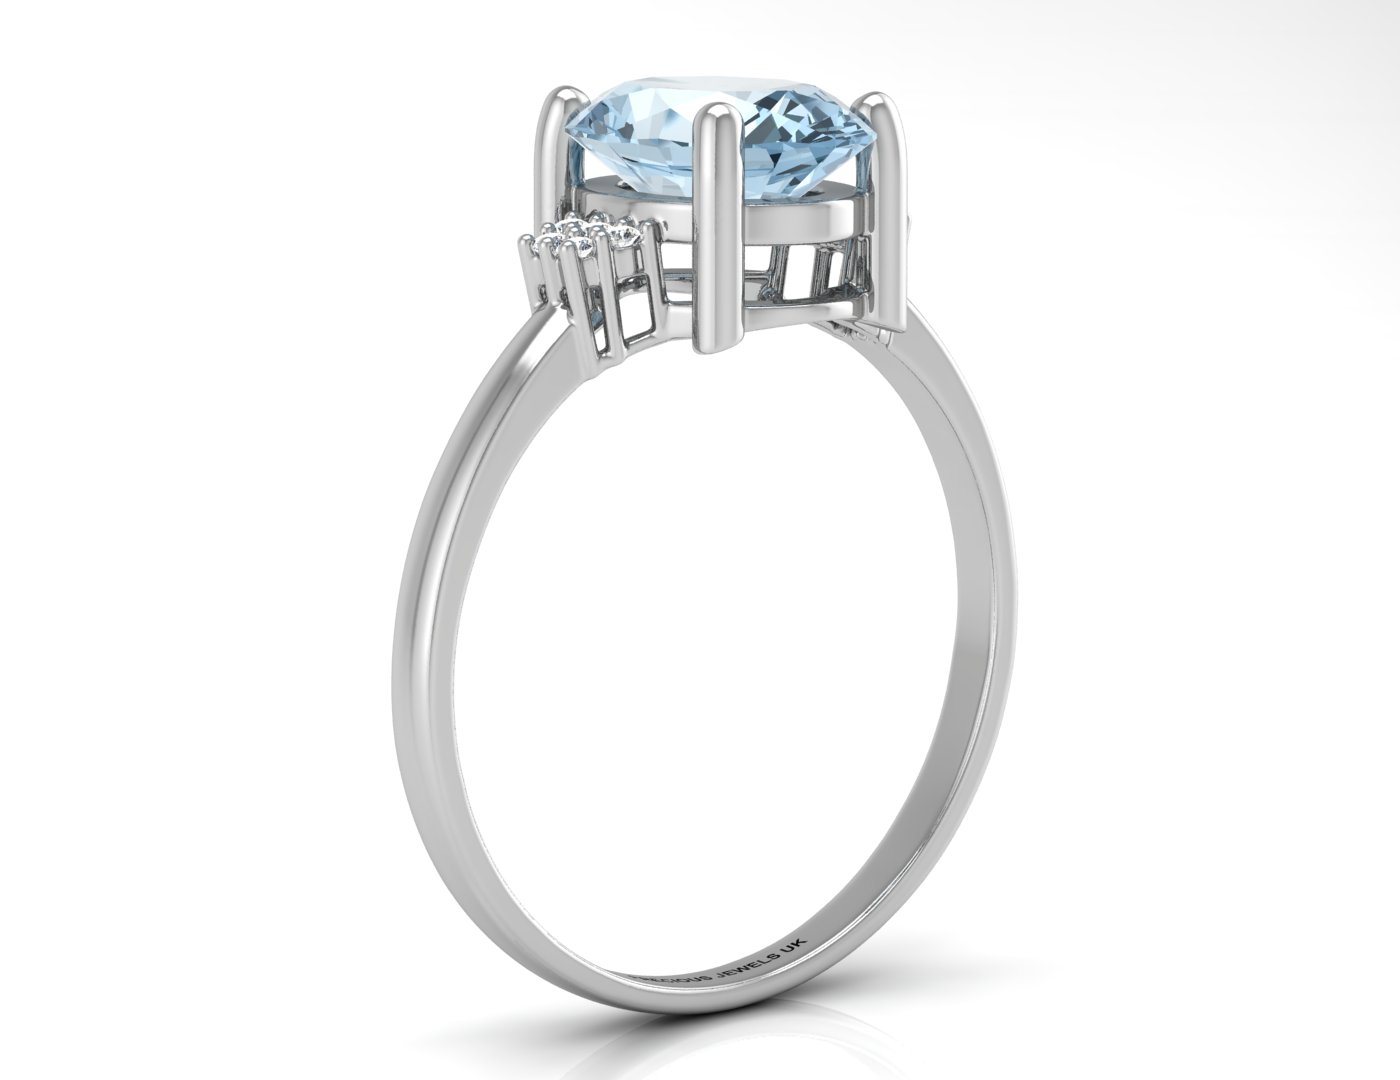 9ct White Gold Diamond And Blue Topaz Ring (BT1.89) 0.03 Carats - Valued By GIE £1,210.00 - An - Image 2 of 5